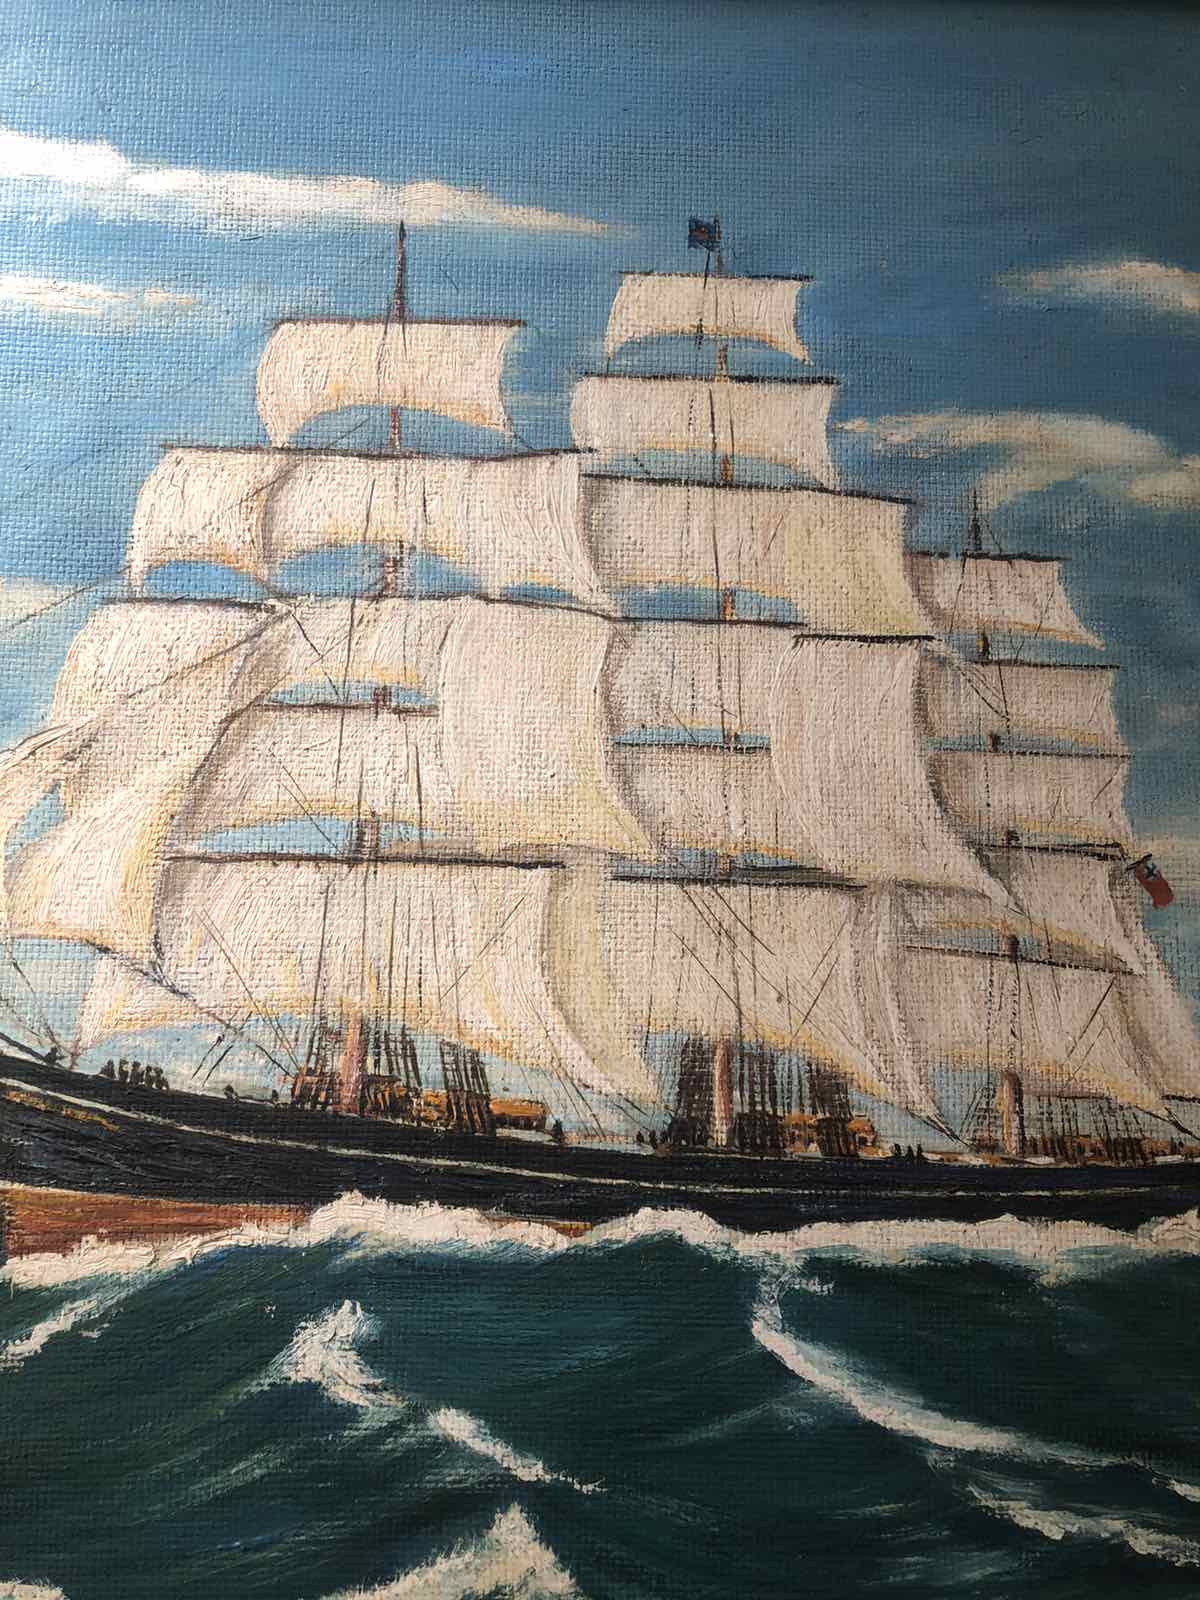 Vintage oil painting of a ship seascape